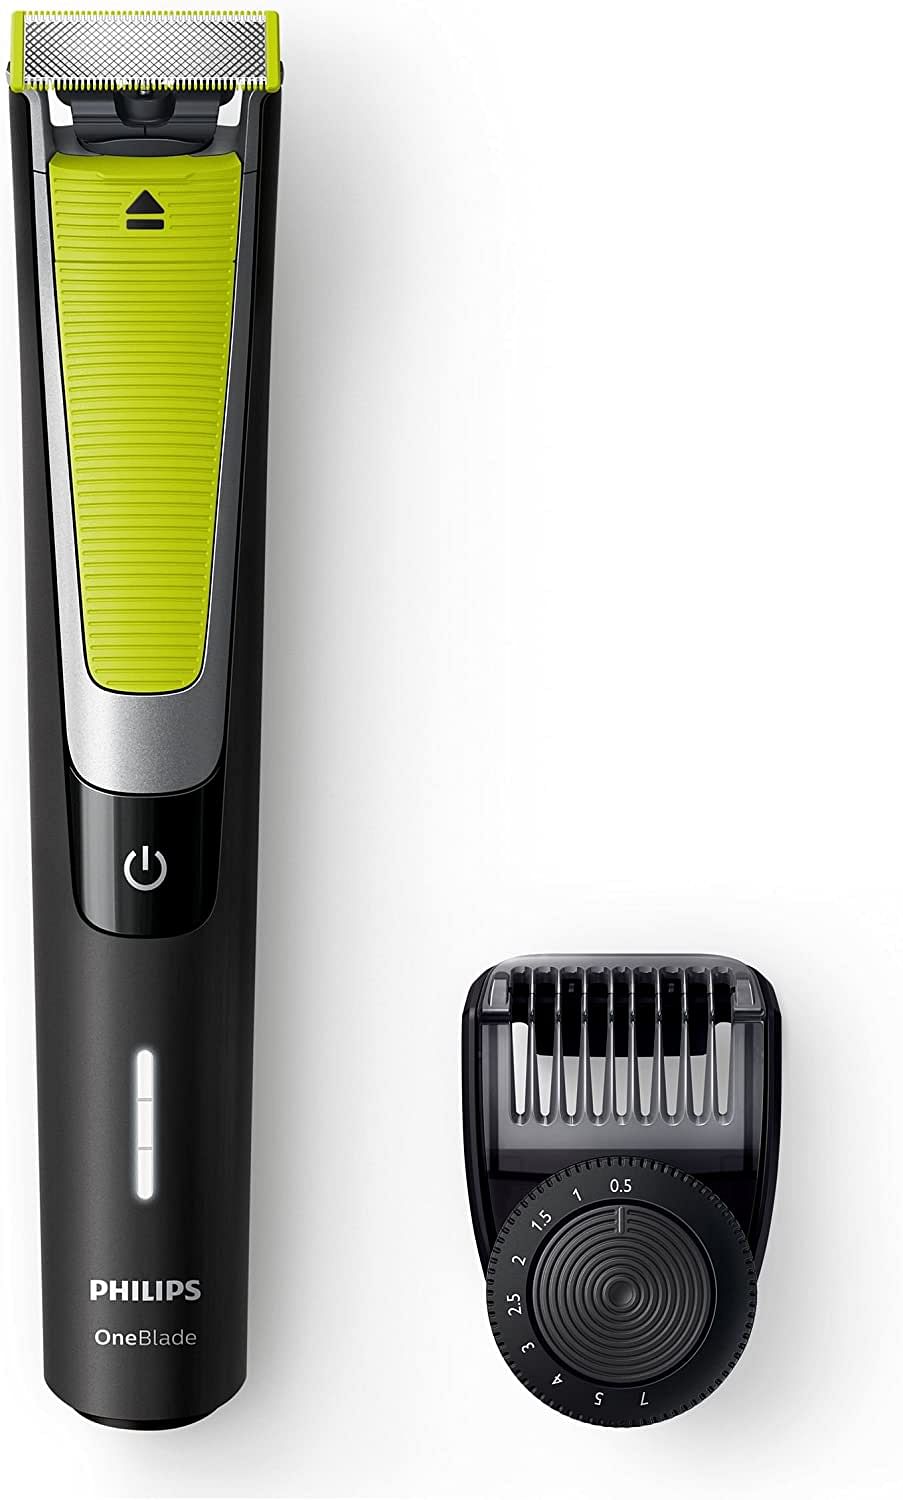 PHILIPS QP6505, OneBlade Pro Shaver & Trimmer, Black/Lime Green/Silver